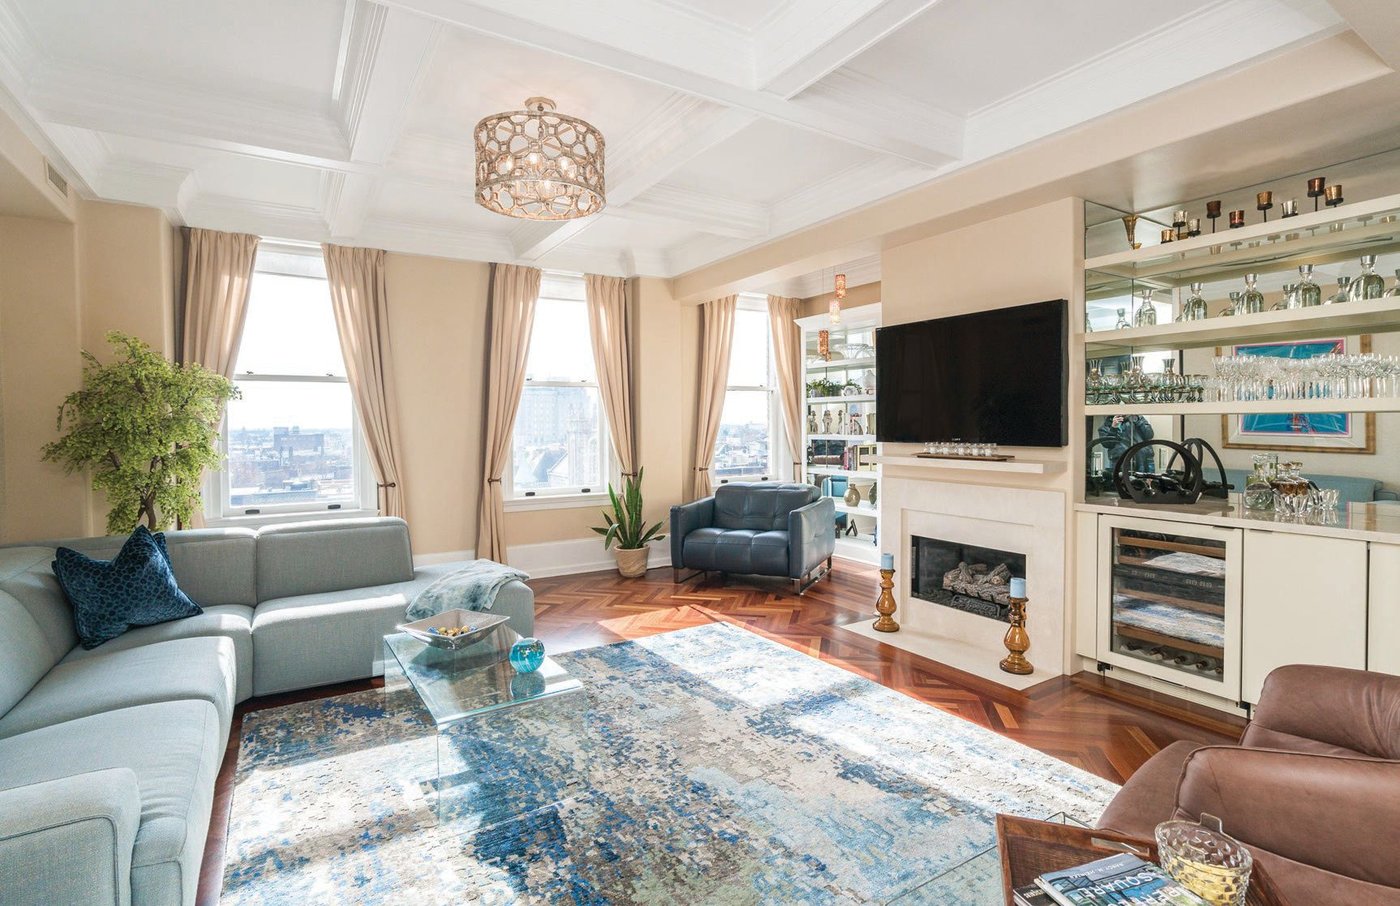 A remarkable view of the luxe living room at this Barclay condominium PHOTO COURTESY OF ALLAN DOMB REAL ESTATE